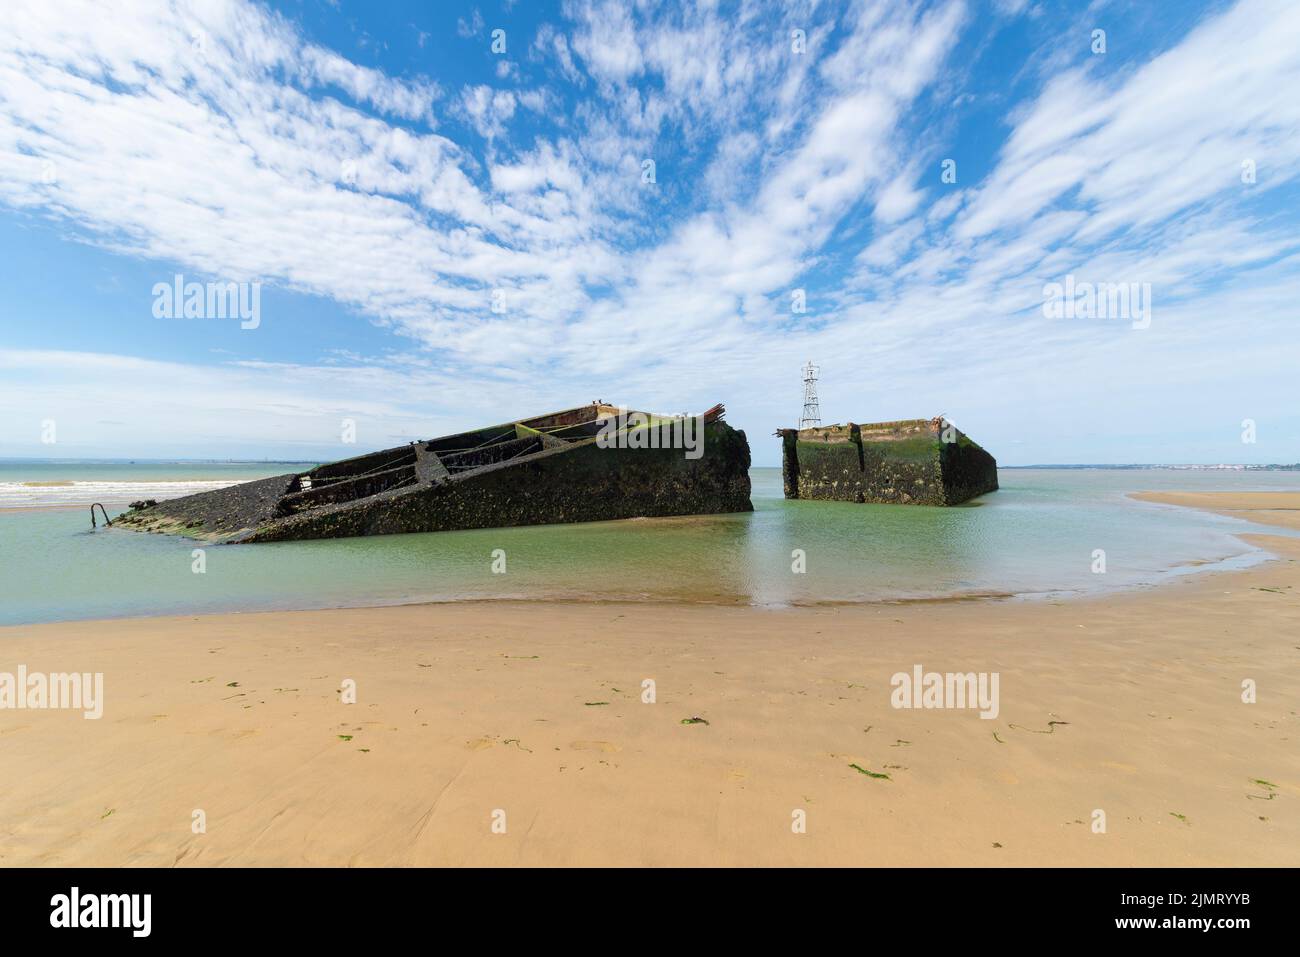 D-Day section of Mulberry Harbour or Harbor grounded in the Thames Estuary near Southend on Sea, Essex. Second World War historic relic on sandbank Stock Photo